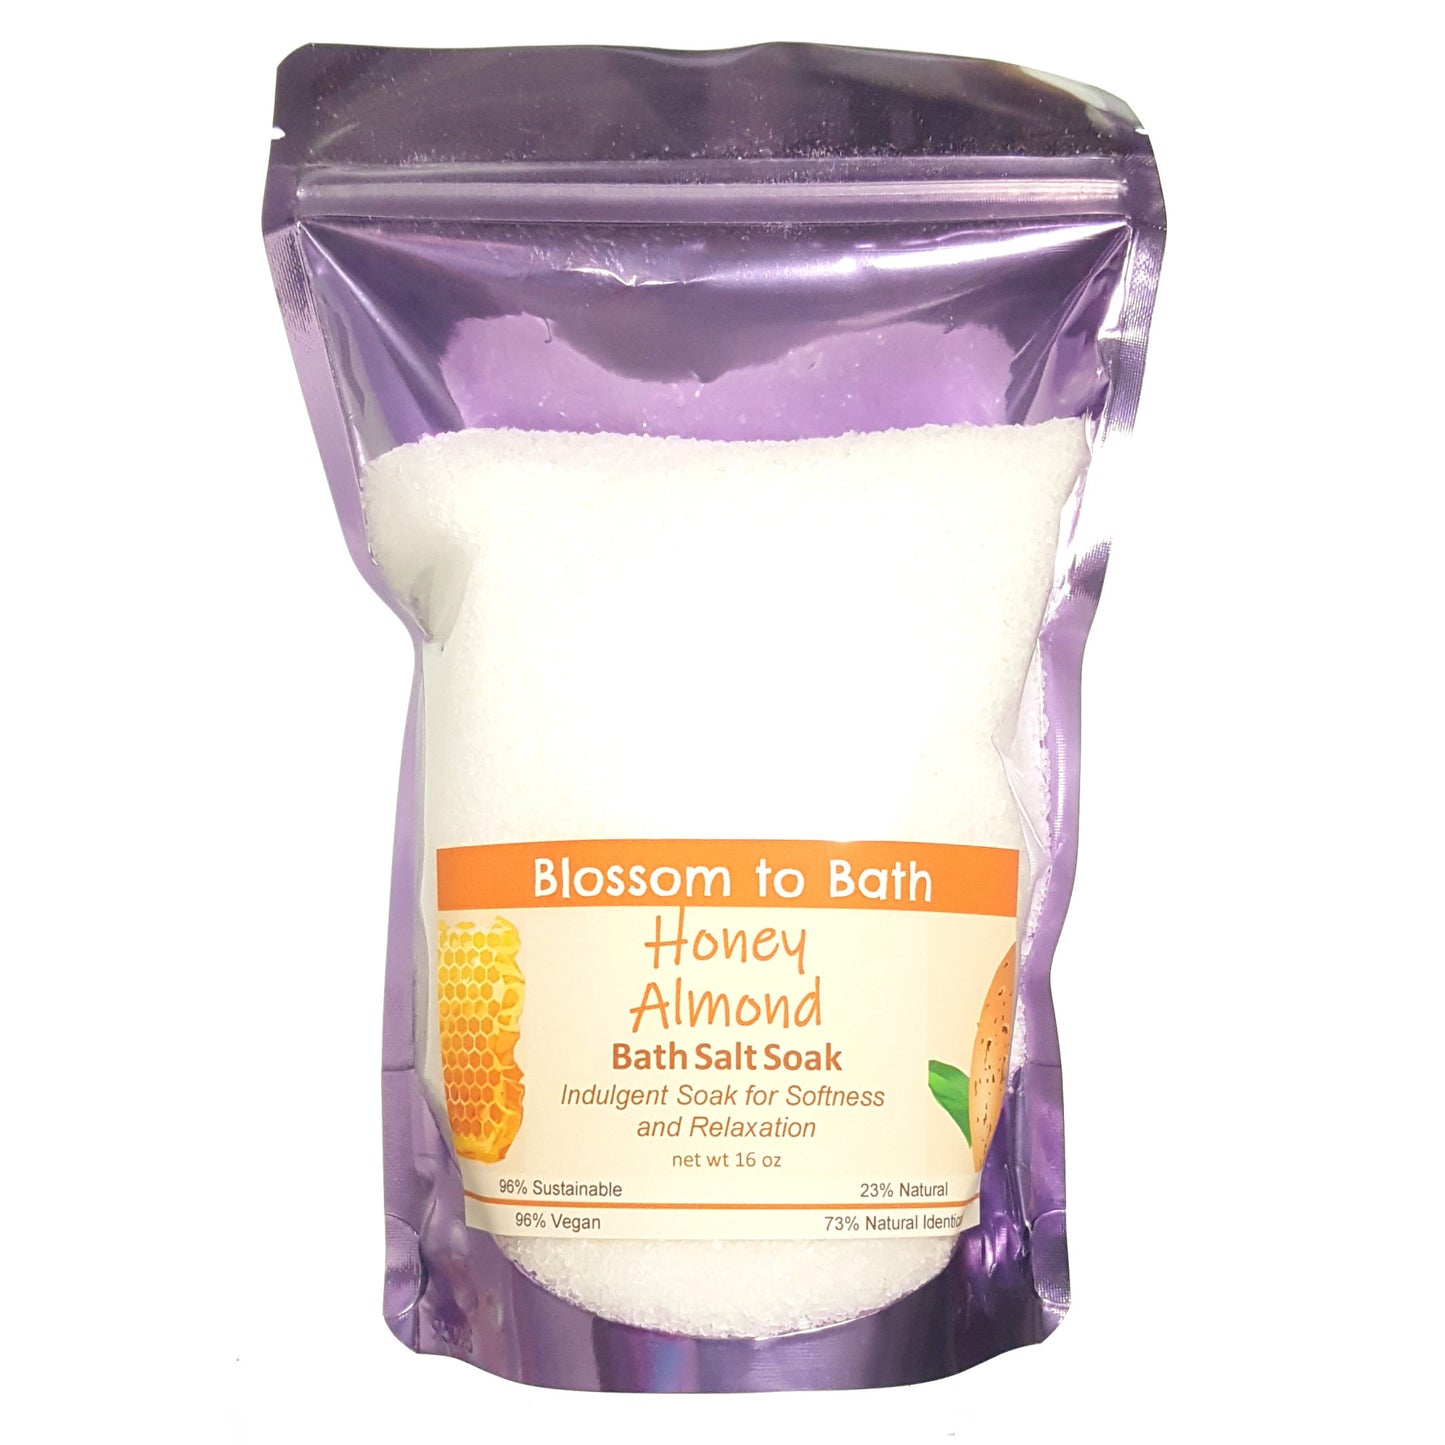 Buy Blossom to Bath Honey Almond Bath Salt Soak from Flowersong Soap Studio.  Scented epsom salts for a luxurious soaking experience  Sweetly fragrant nutty almond drizzled with honey.